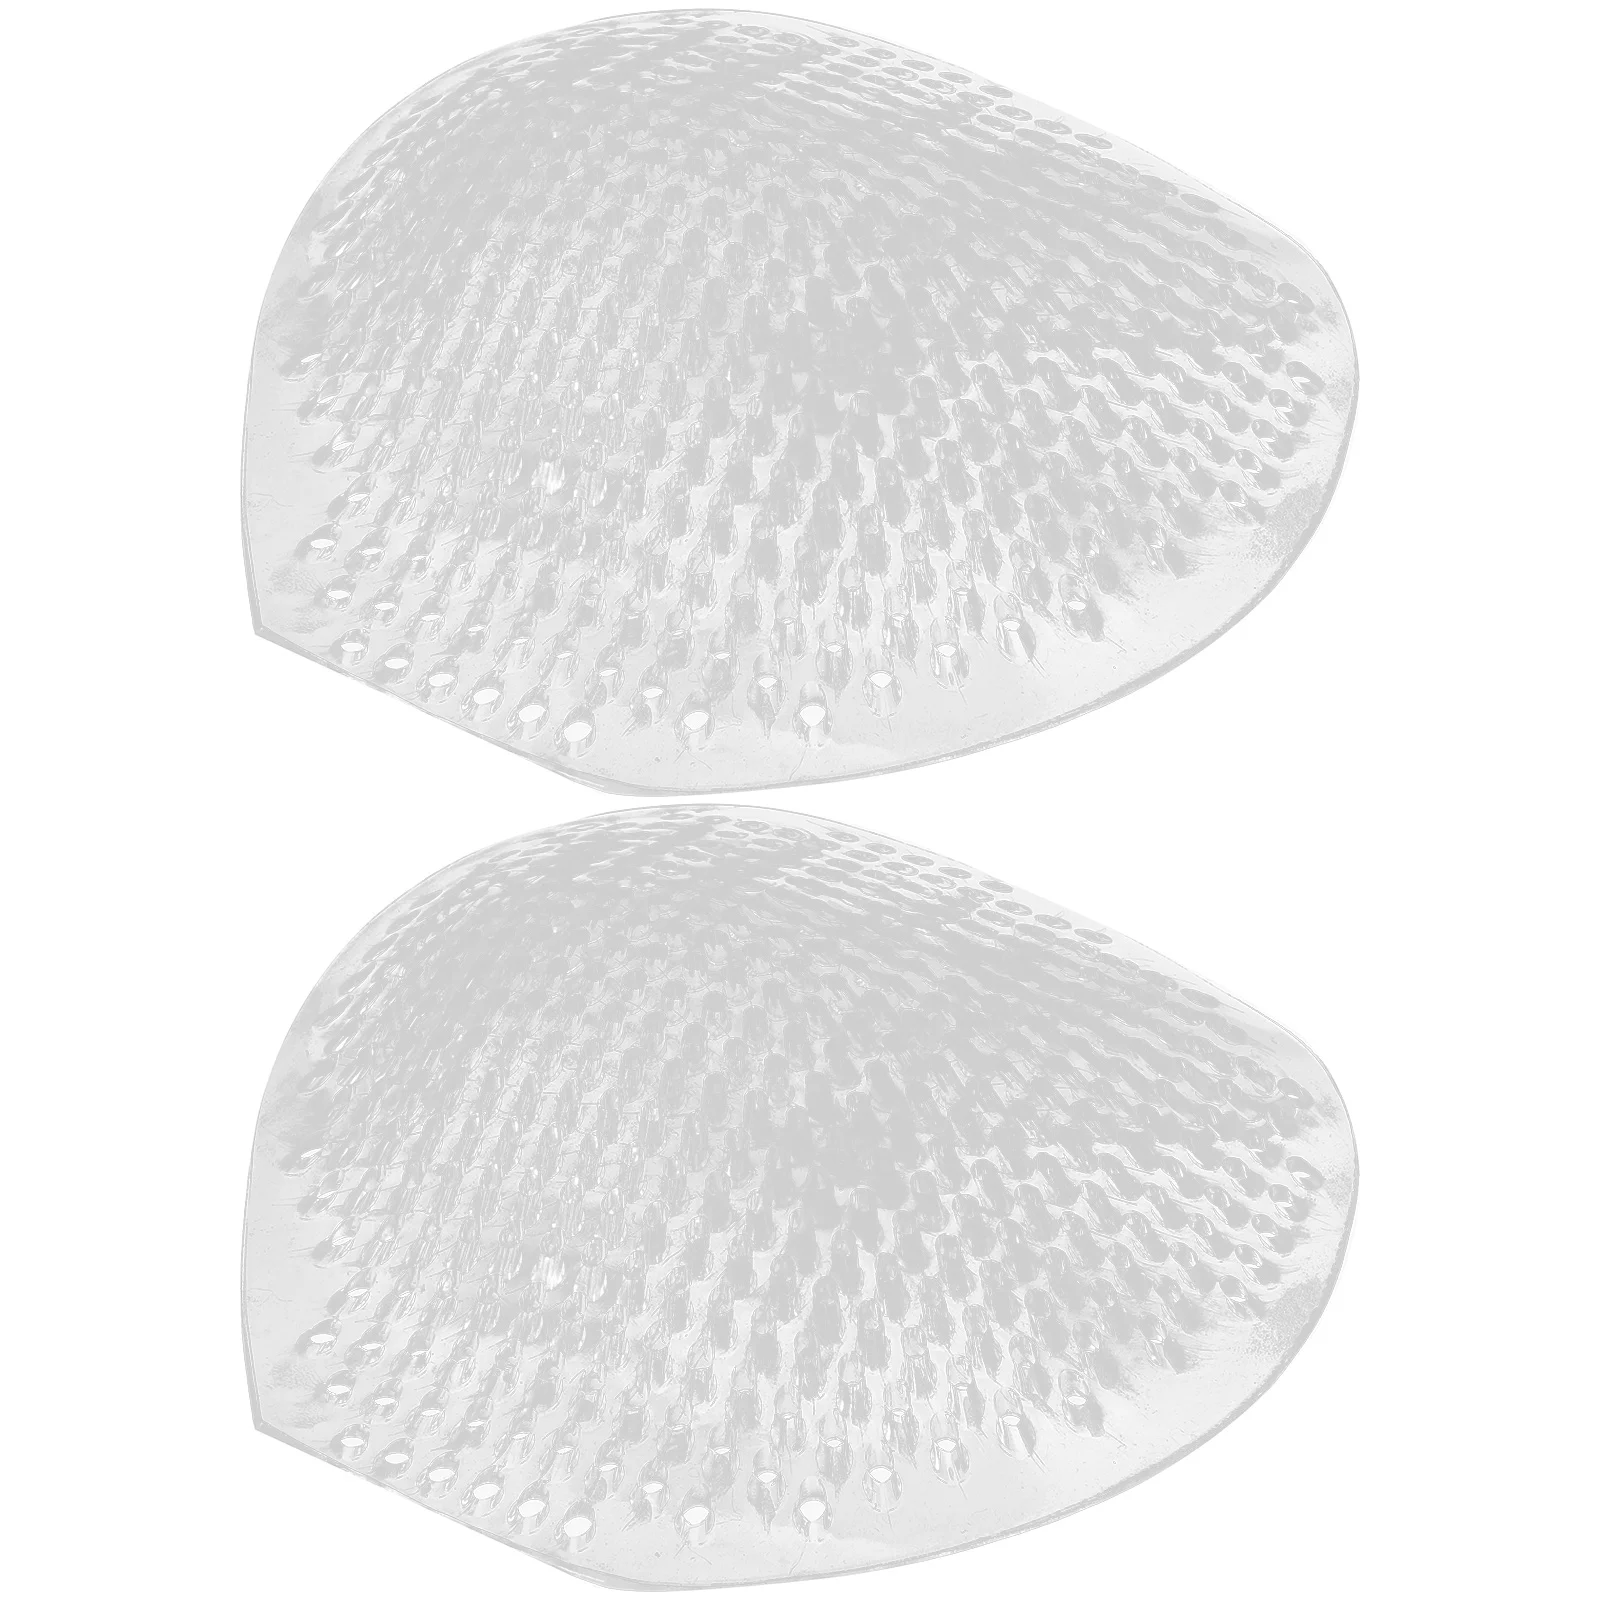 1 Pair Silicone Inserts Pads Breathable Breast Enhancers Inserts Pads